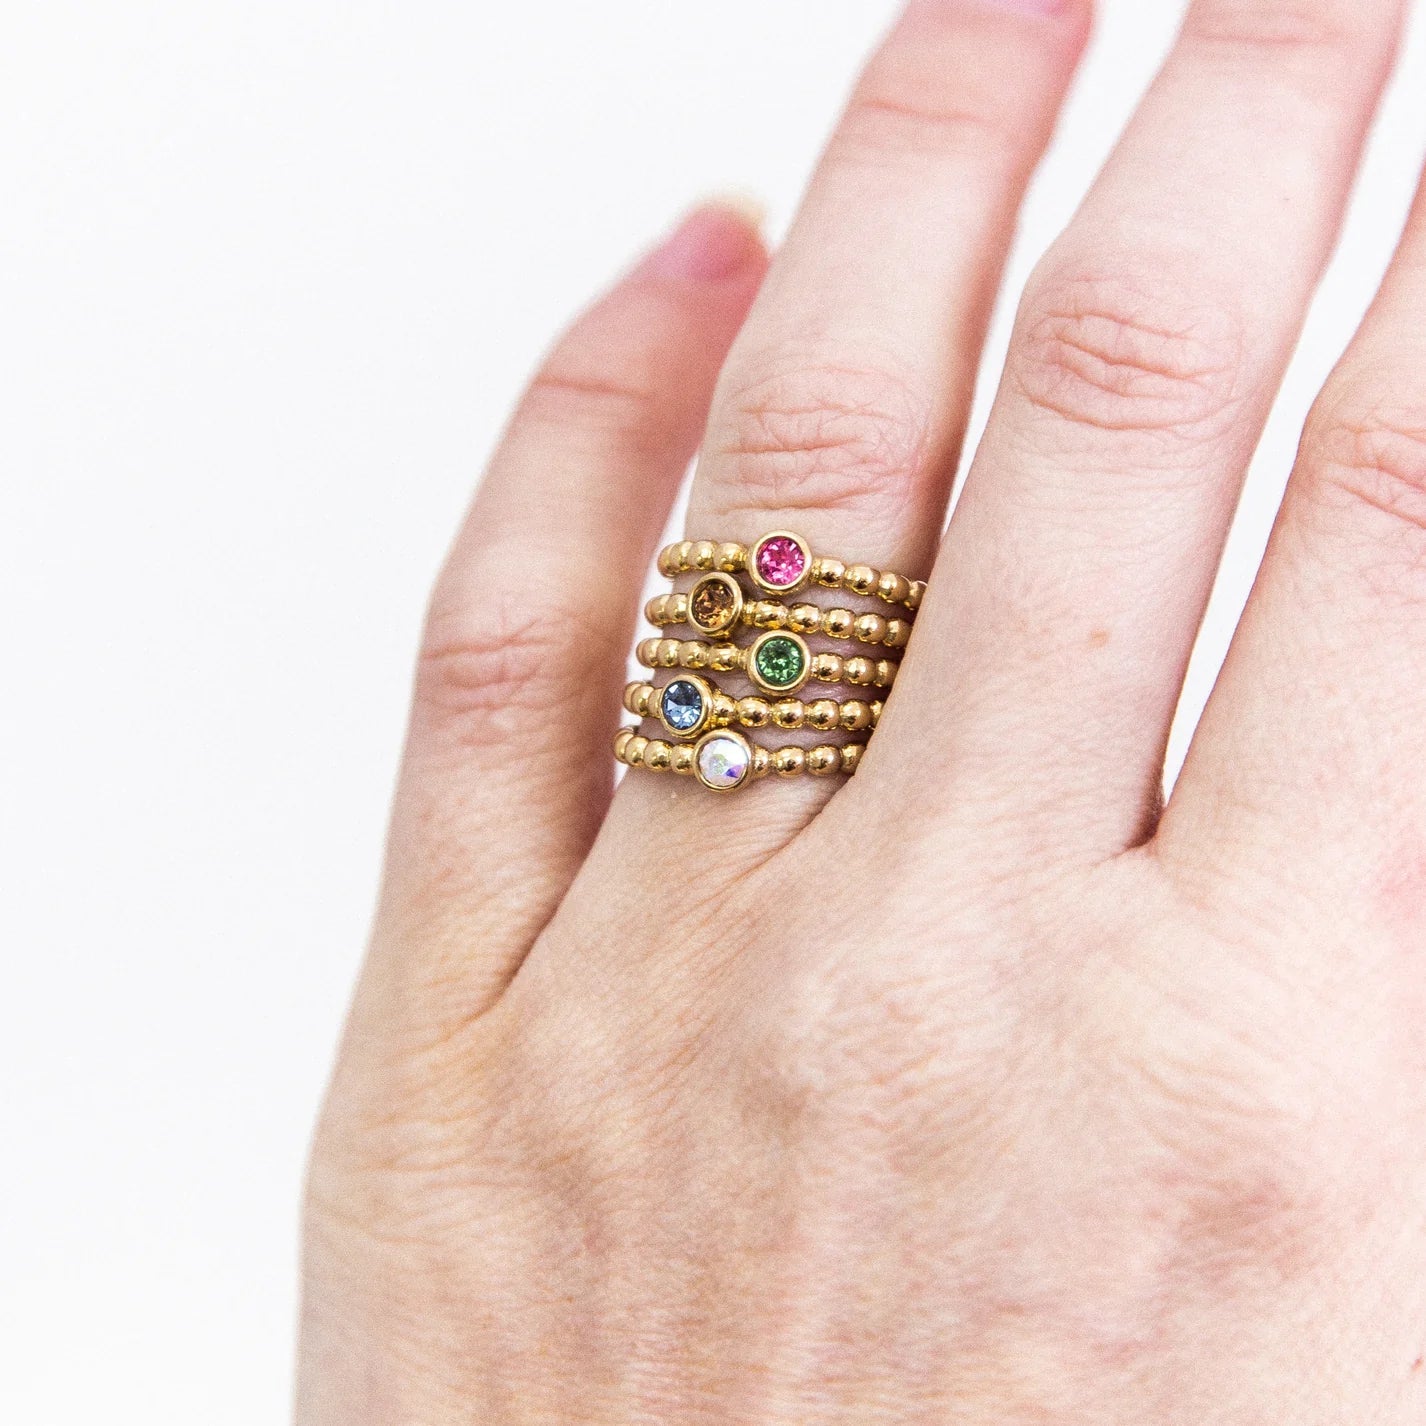 Matino Deluxe Ring in Rose Gold - Rose